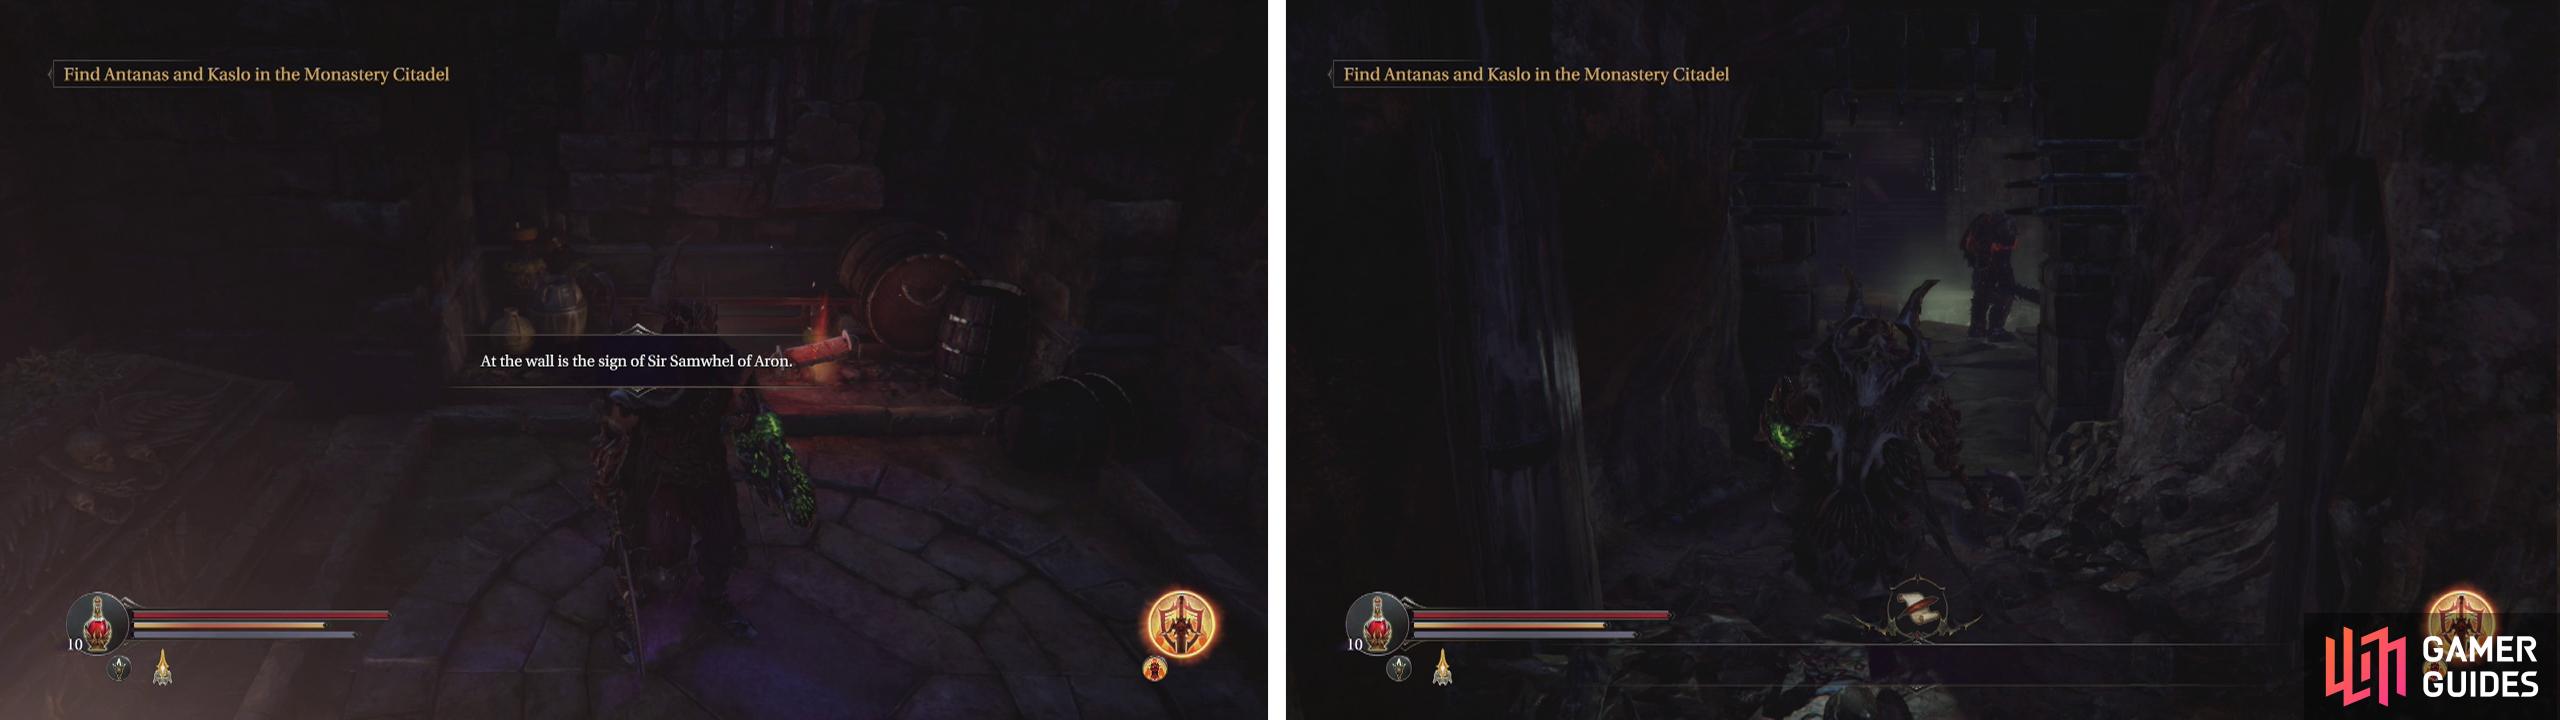 This side room has an Audio Note and a Sarcophagus we can interact with (left). There is a pit in this room (right) we can get enemies to fall in for an achievement/trophy.